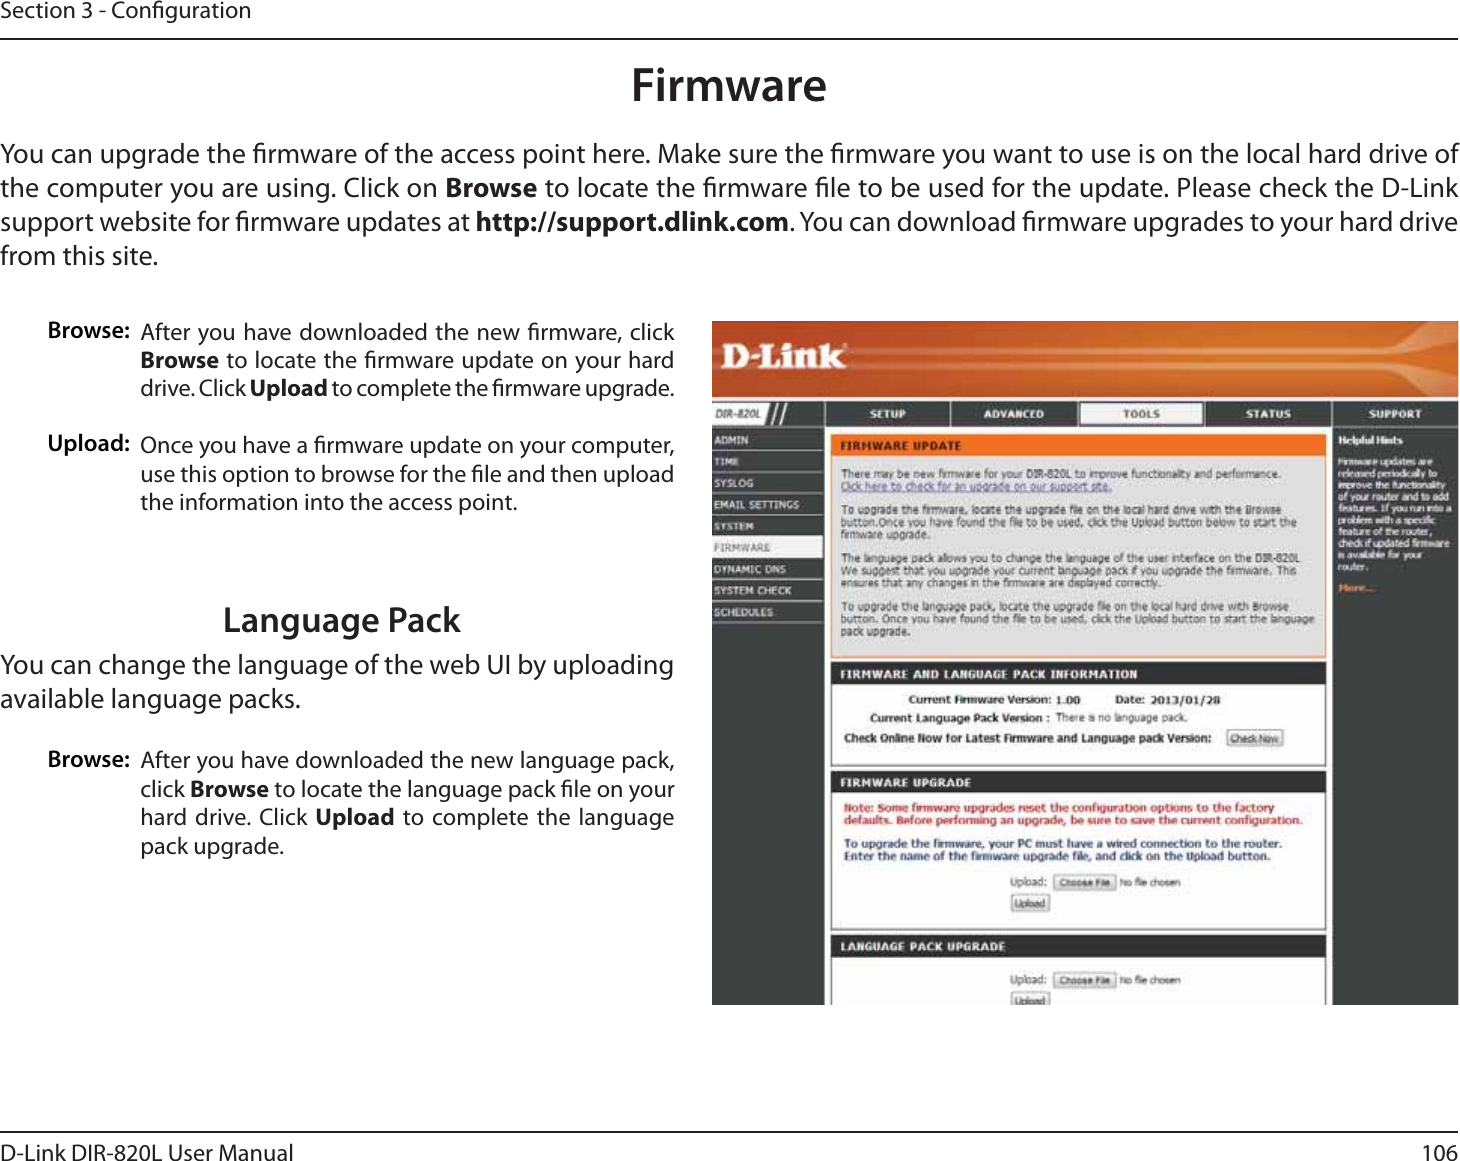 106D-Link DIR-820L User ManualSection 3 - CongurationFirmwareBrowse:Upload:After you have downloaded the new rmware, click Browse to locate the rmware update on your hard drive. Click Upload to complete the rmware upgrade.Once you have a rmware update on your computer, use this option to browse for the le and then upload the information into the access point. You can upgrade the rmware of the access point here. Make sure the rmware you want to use is on the local hard drive of the computer you are using. Click on Browse to locate the rmware le to be used for the update. Please check the D-Link support website for rmware updates at http://support.dlink.com. You can download rmware upgrades to your hard drive from this site.After you have downloaded the new language pack, click Browse to locate the language pack le on your hard drive. Click Upload to complete the language pack upgrade.Language PackYou can change the language of the web UI by uploading available language packs.Browse: